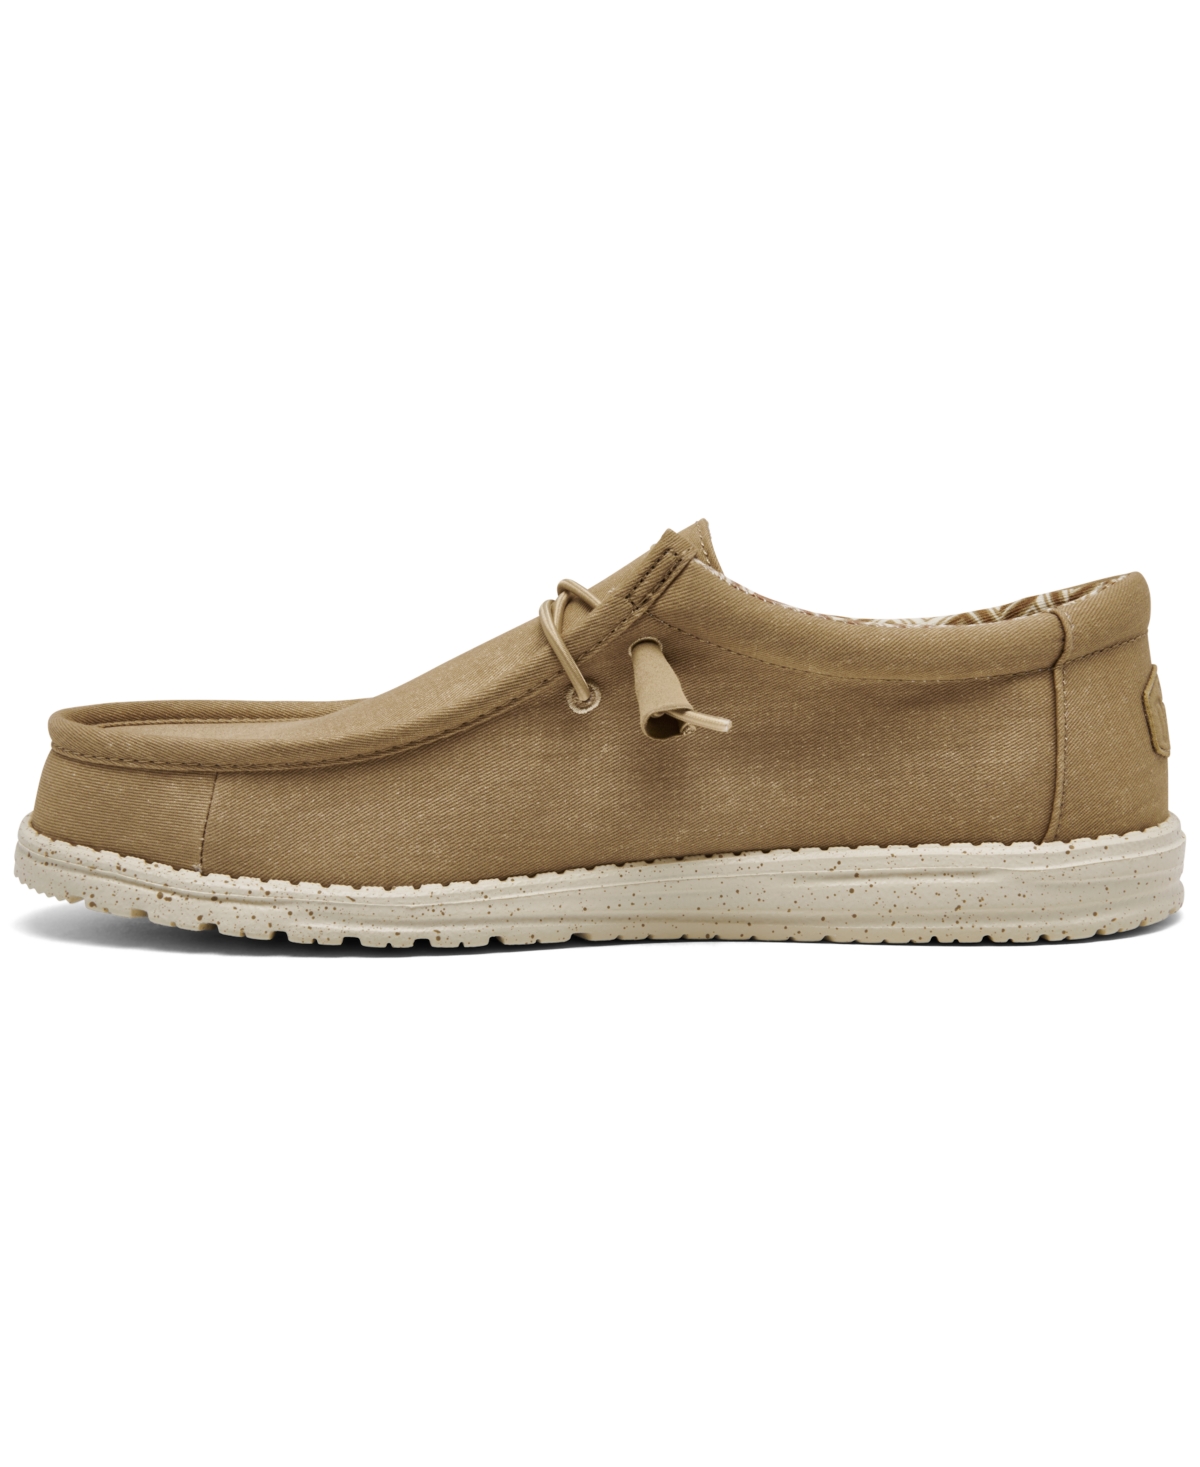 Shop Hey Dude Men's Wally Canvas Casual Moccasin Sneakers From Finish Line In Tan Khaki